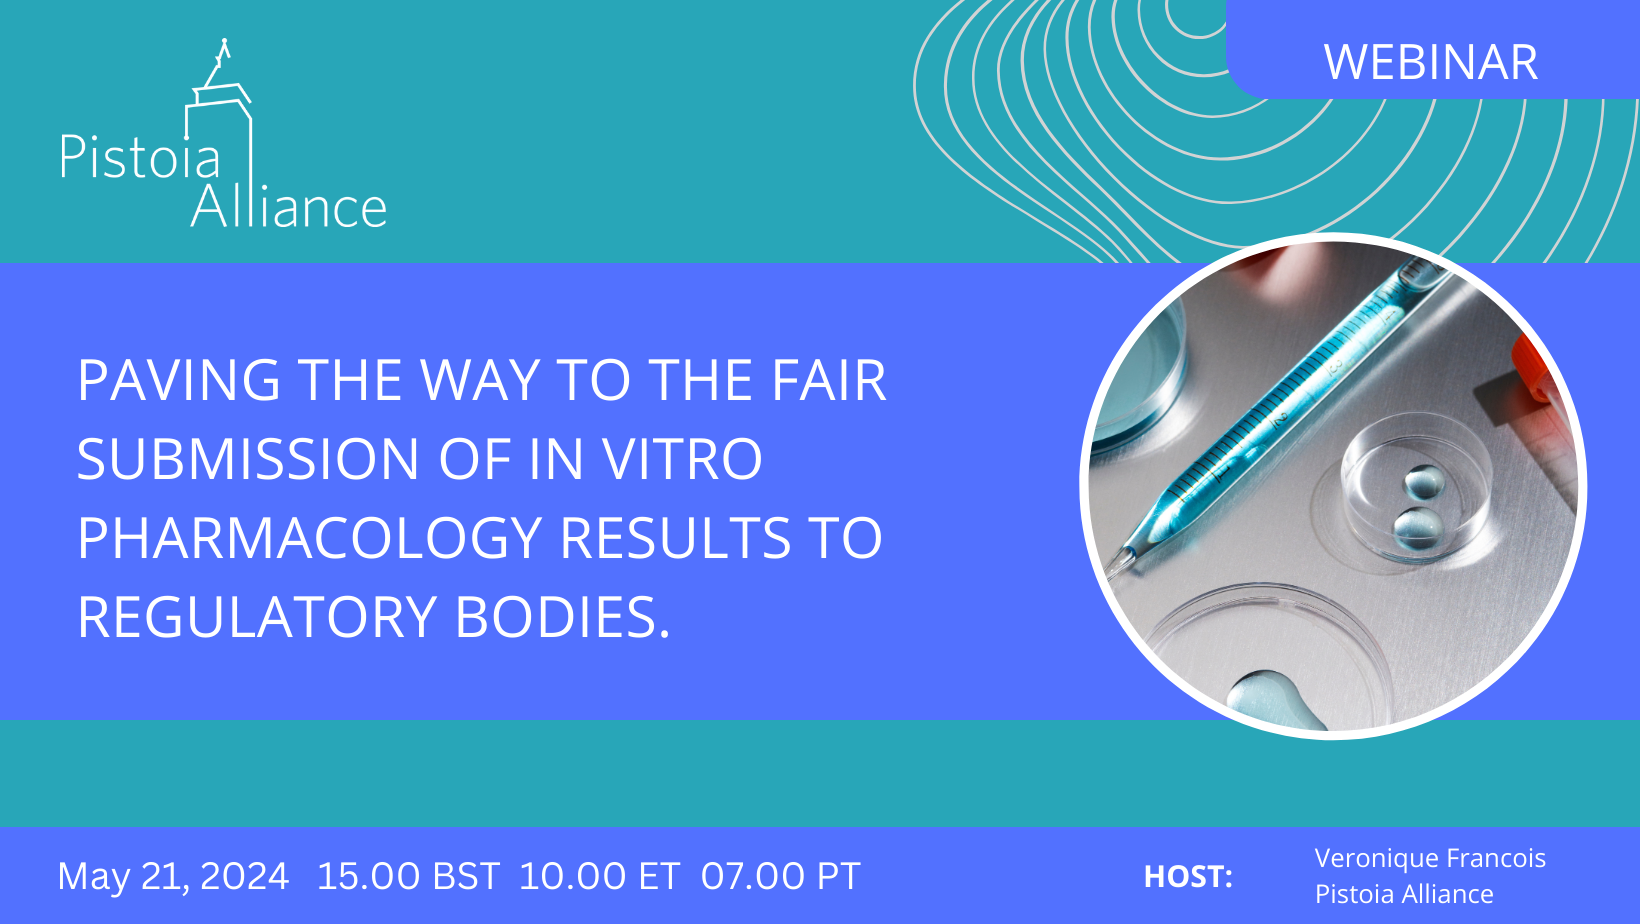 PAVING THE WAY TO THE FAIR SUBMISSION OF IN VITRO PHARMACOLOGY RESULTS TO REGULATORY BODIES